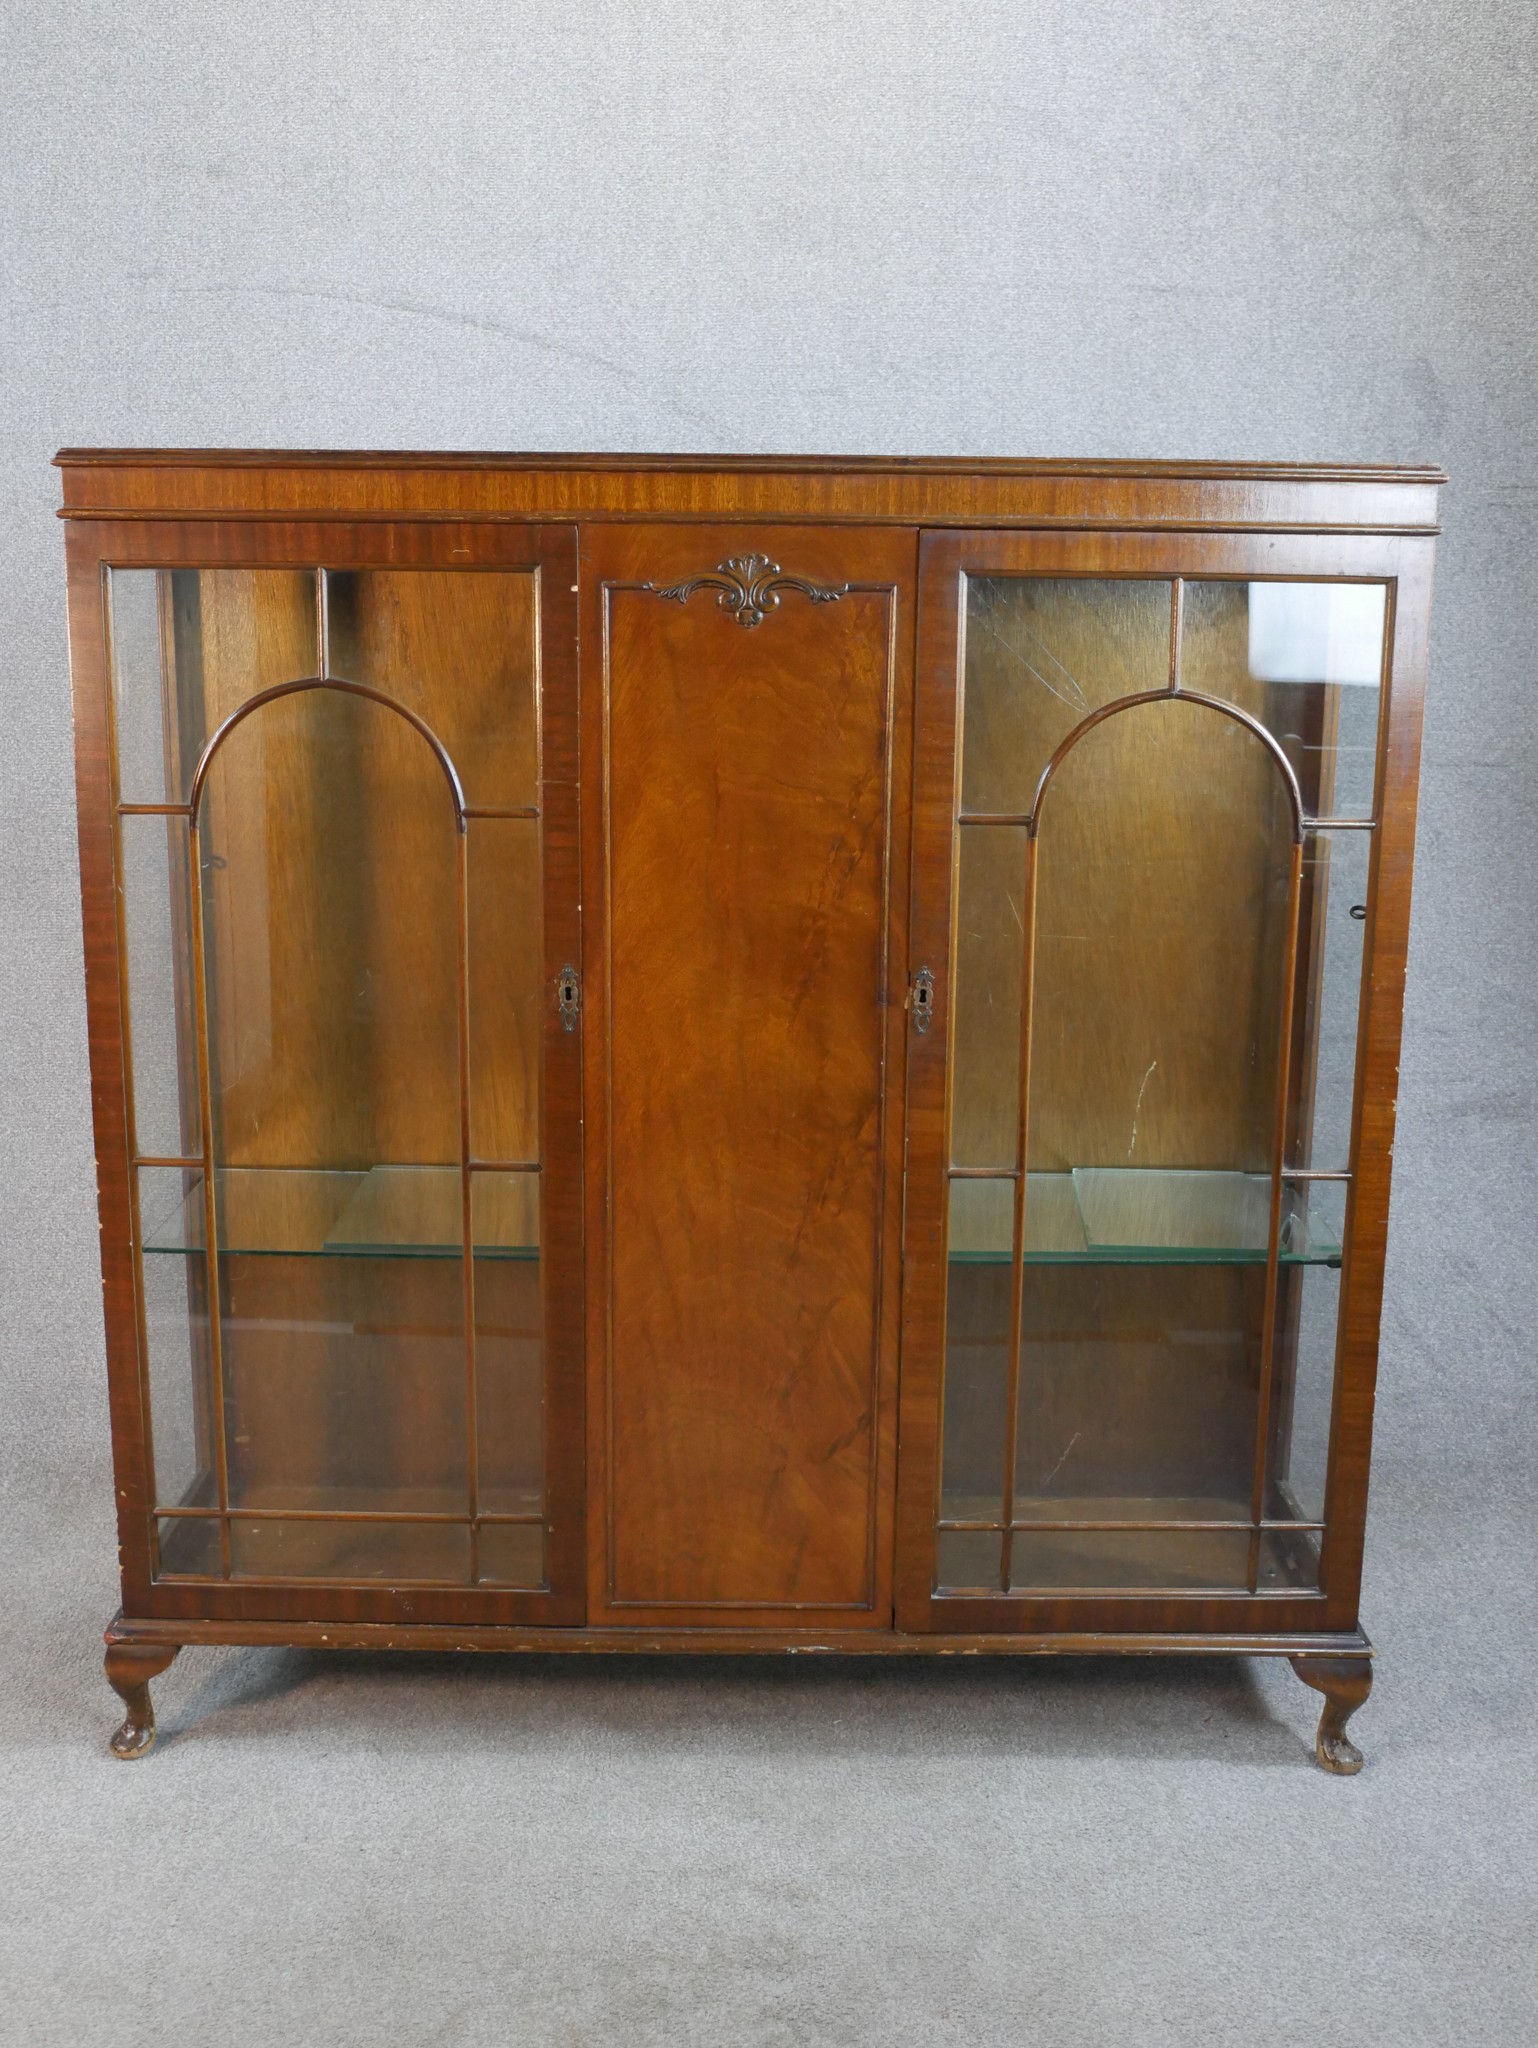 An early 20th century Georgian style twin door mahogany display cabinet; with glass astragel